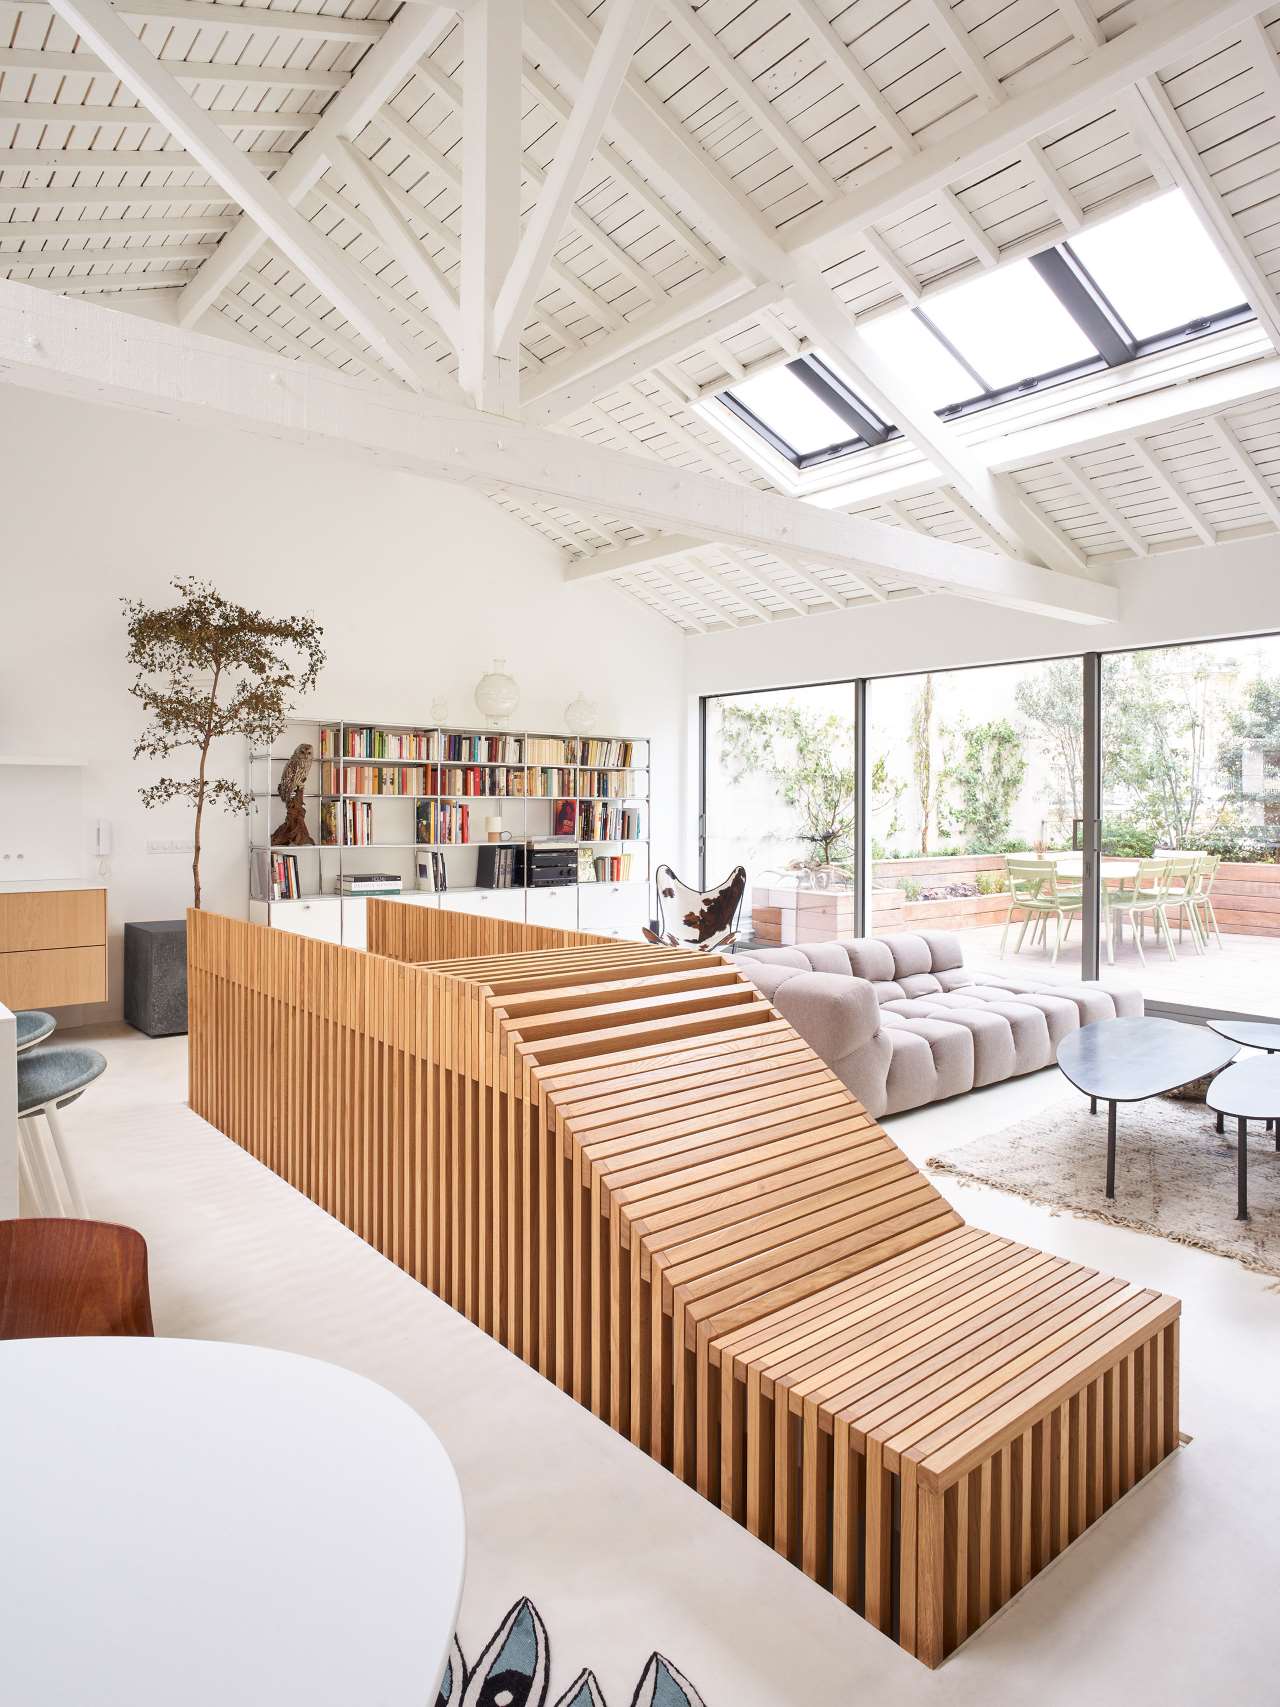 Skylights and an entrance to the terrace bring much natural light to the space